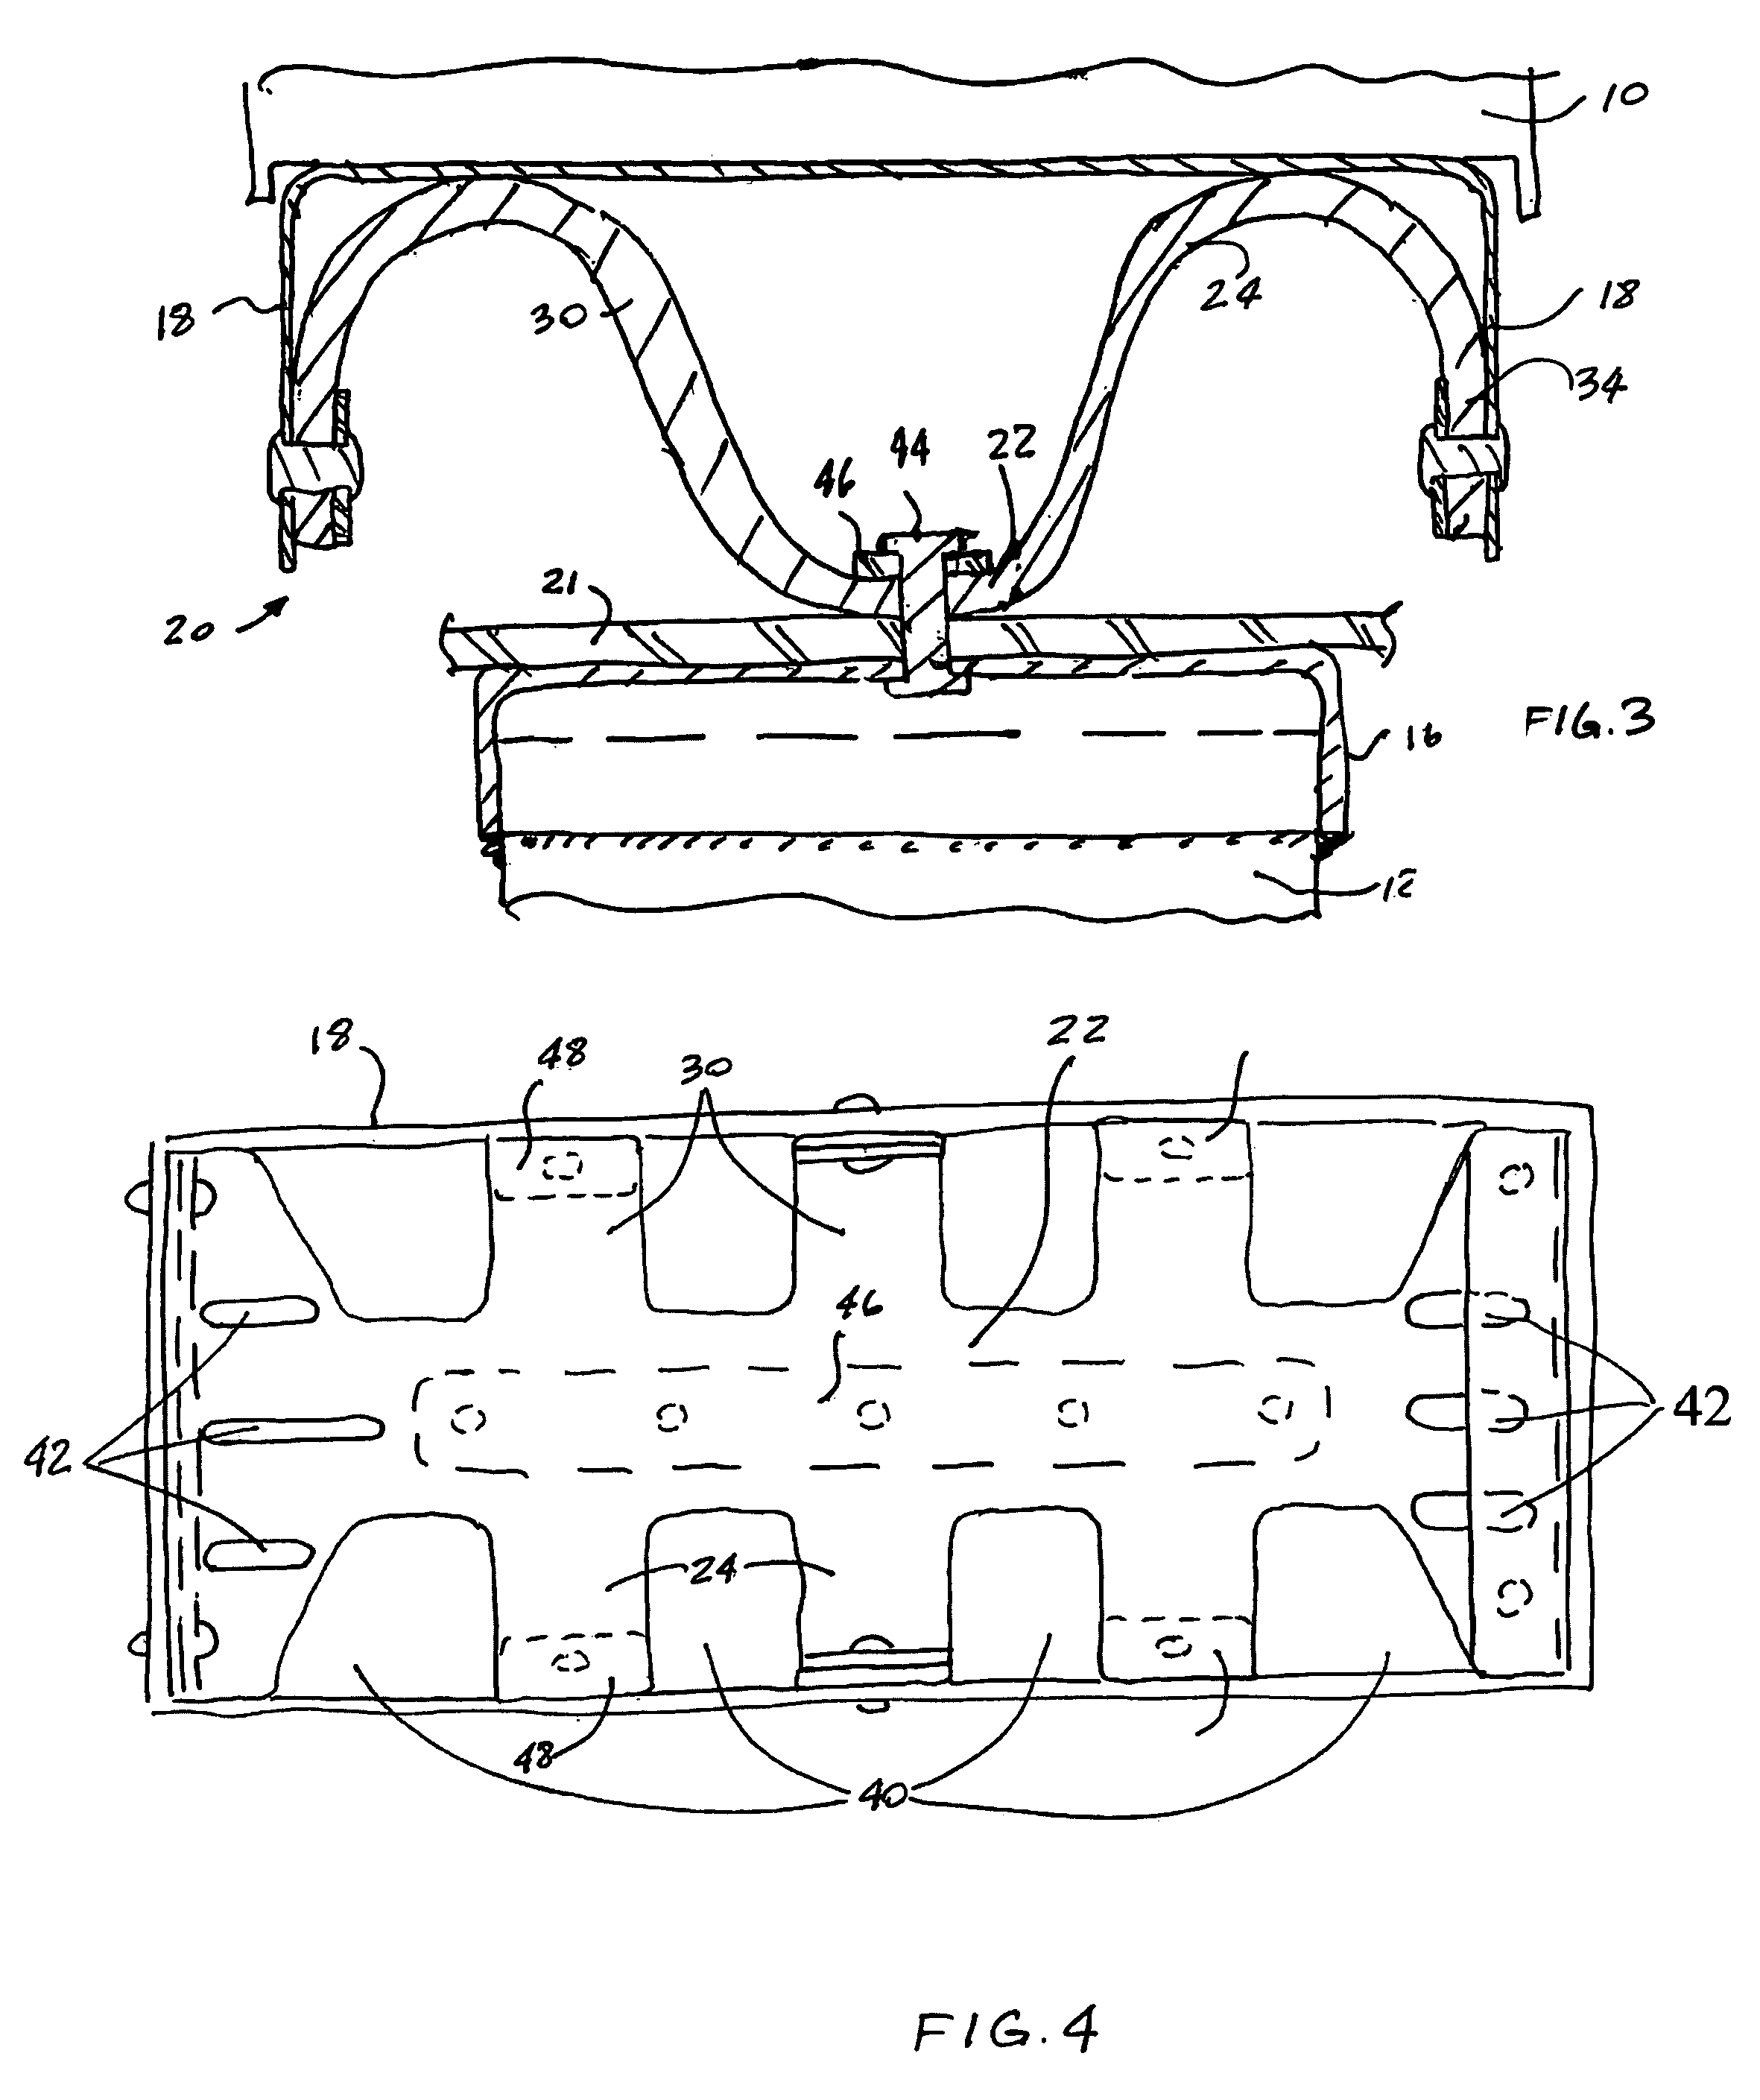 Shock and vibration absorbing device and method